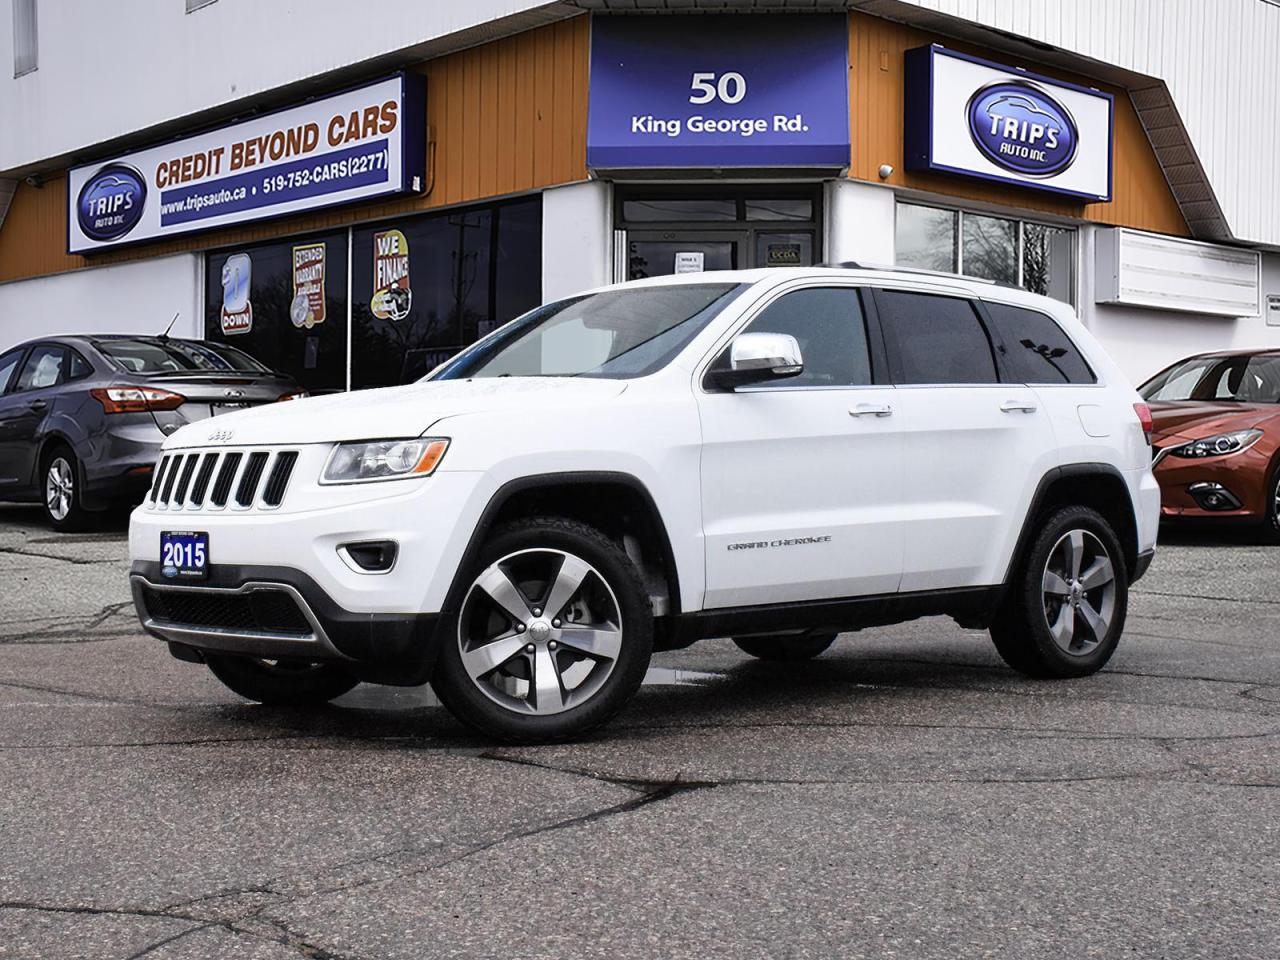 2015 Jeep Grand Cherokee 4WD 4dr Limited/LEATHER/8.4 TOUCHSCREEN/NAVI - Photo #1